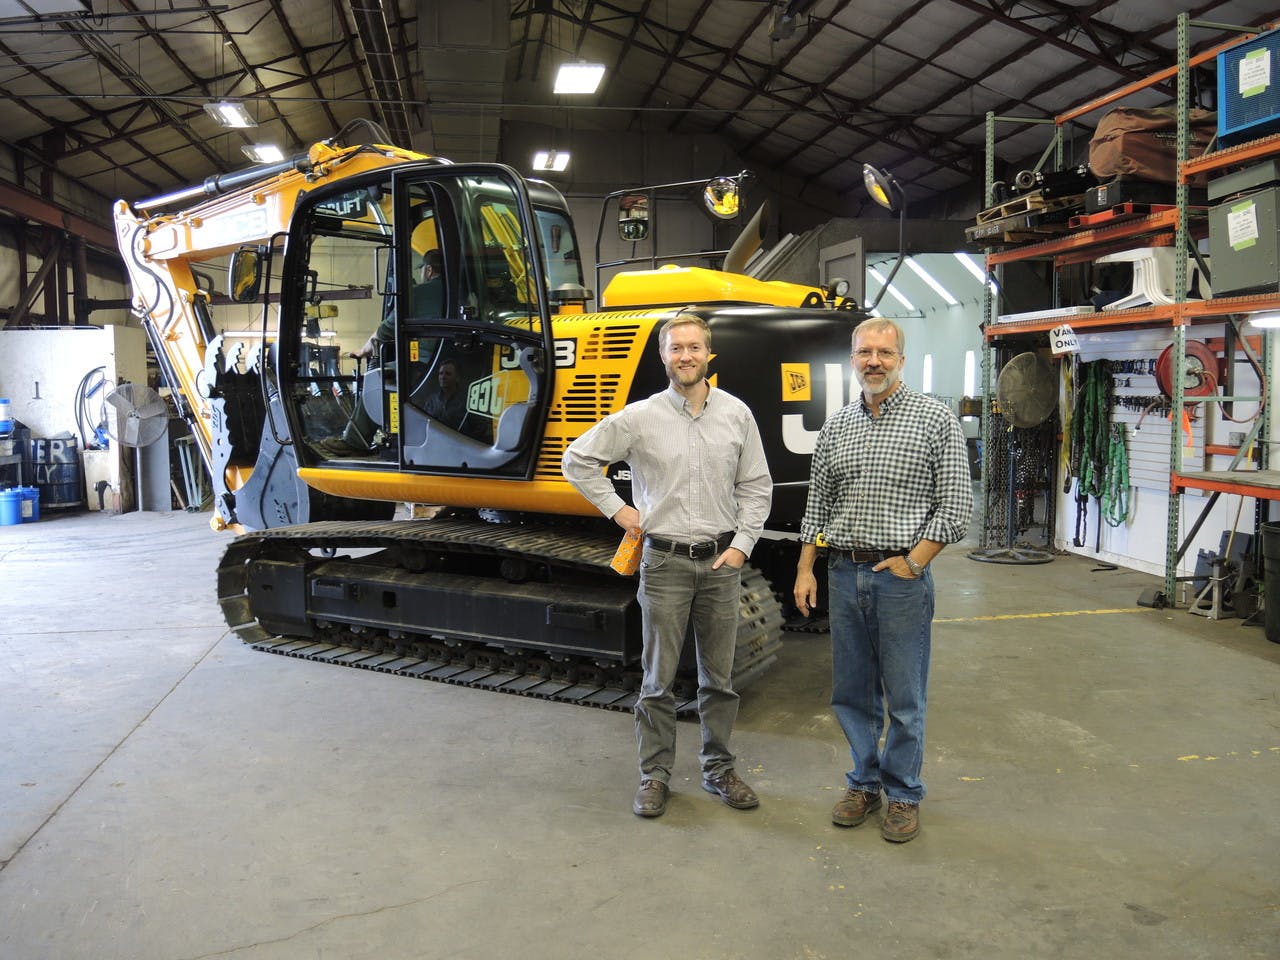 JCB Dealer Network Expands With Addition Of Norlift JCB In Washington, Idaho